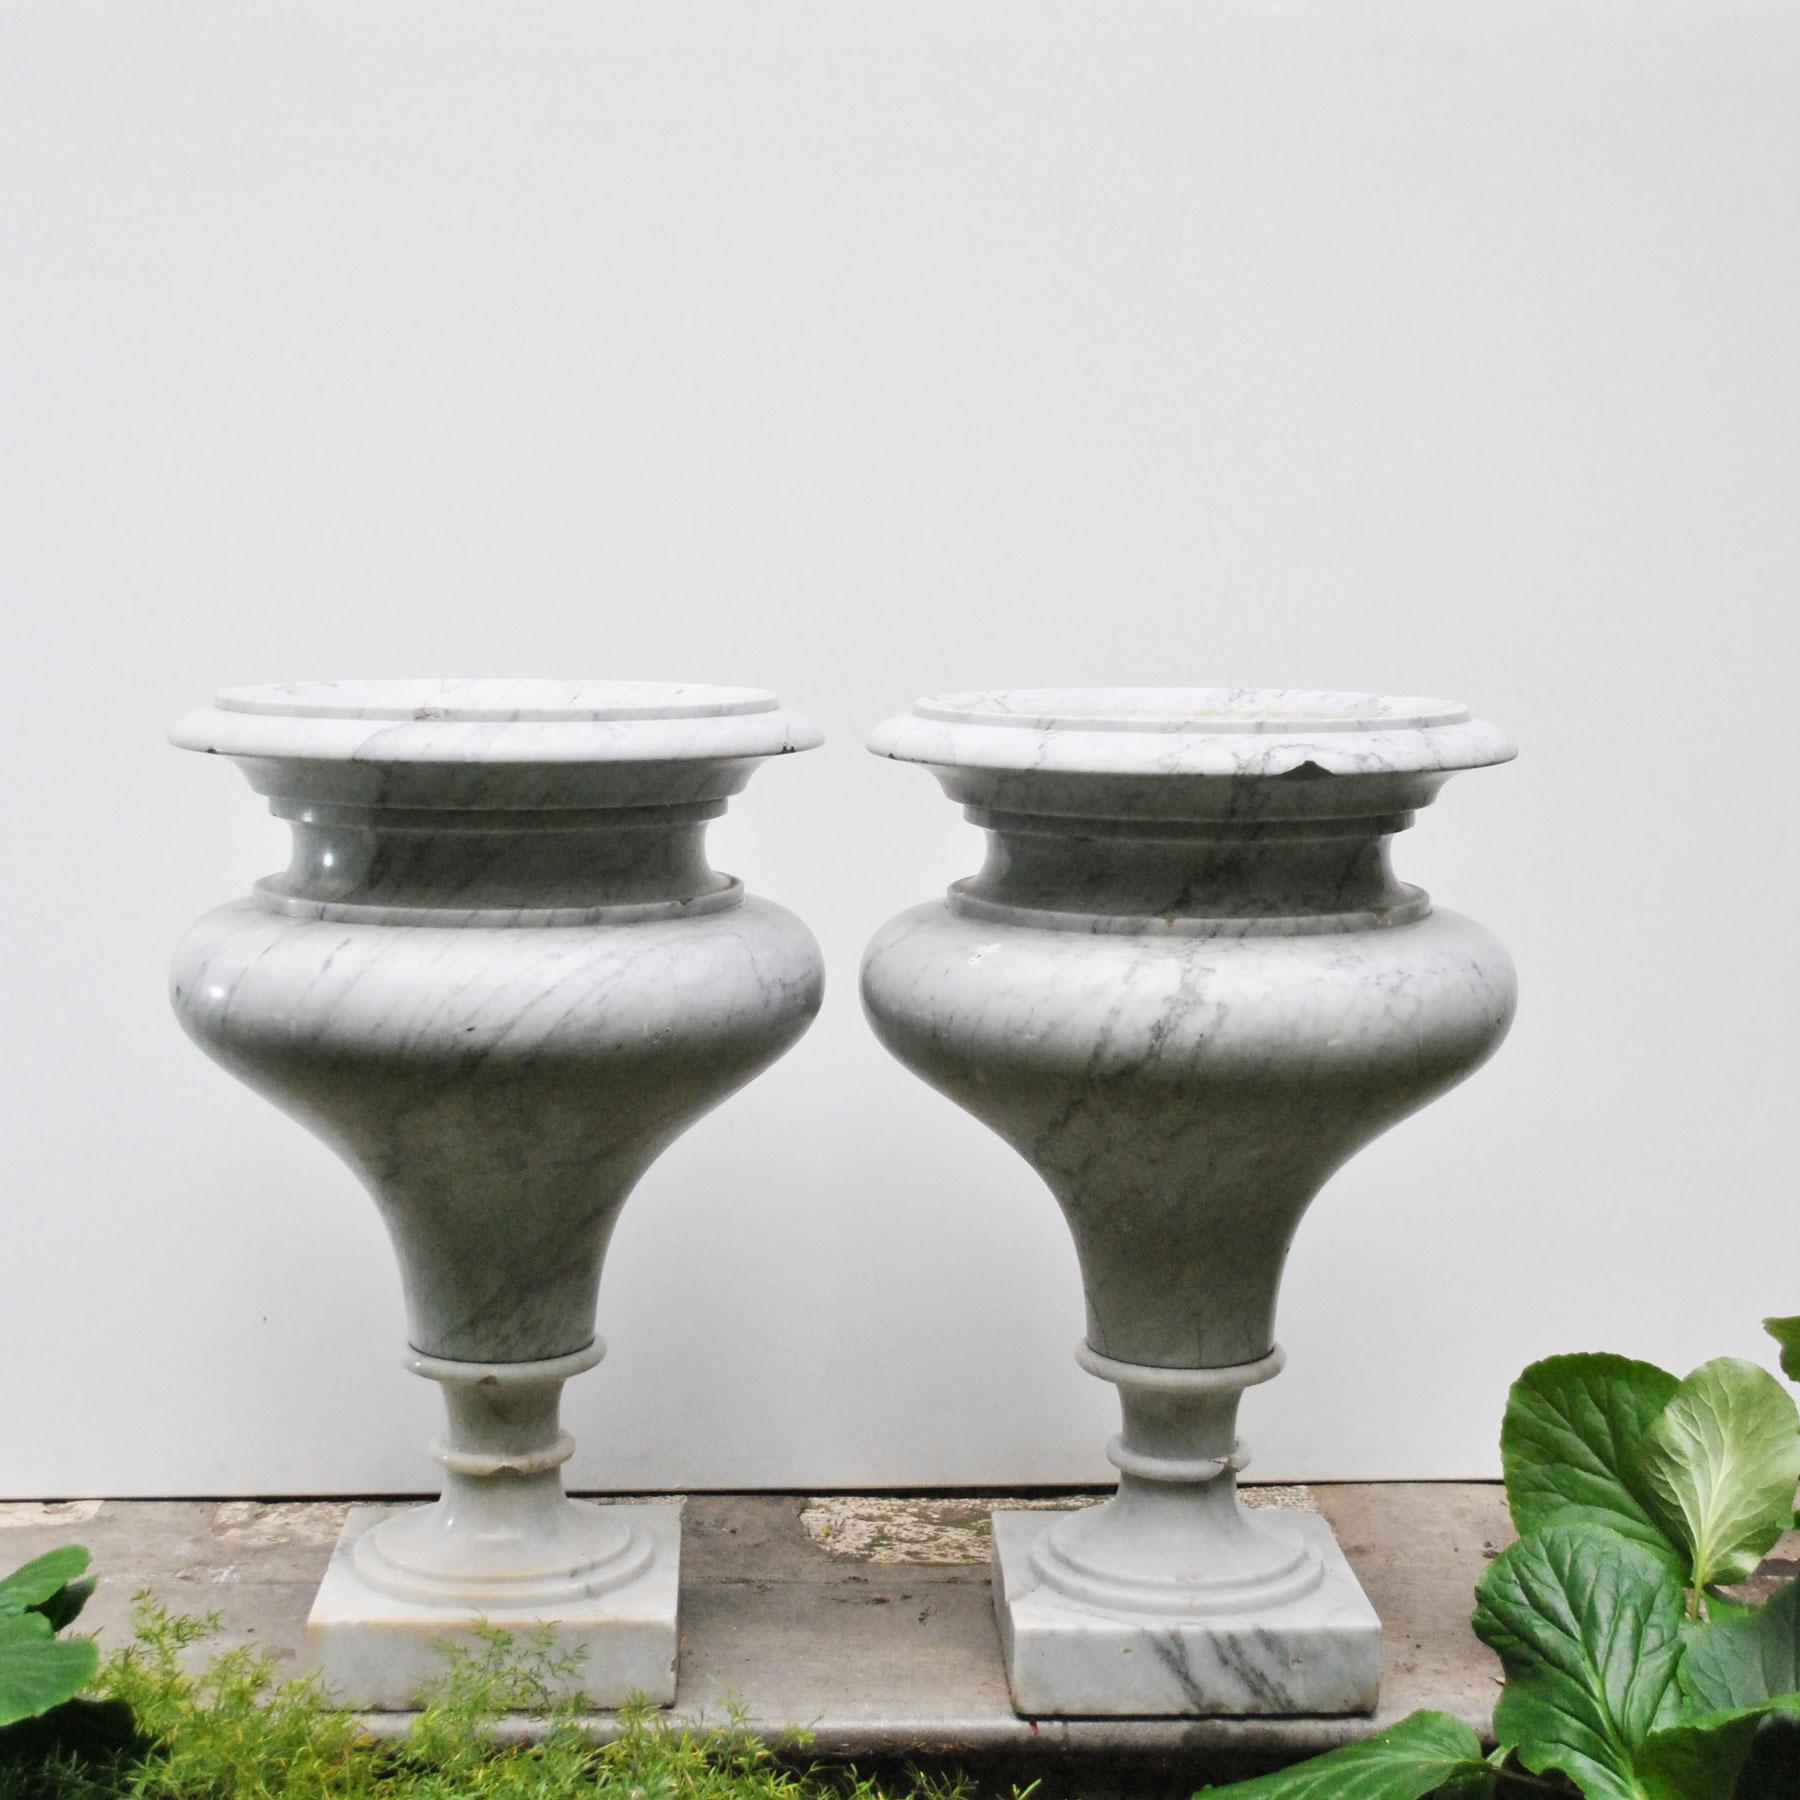 Other Elegant Pair of Large Carrara Marble Vases, Period Early 20th Century For Sale